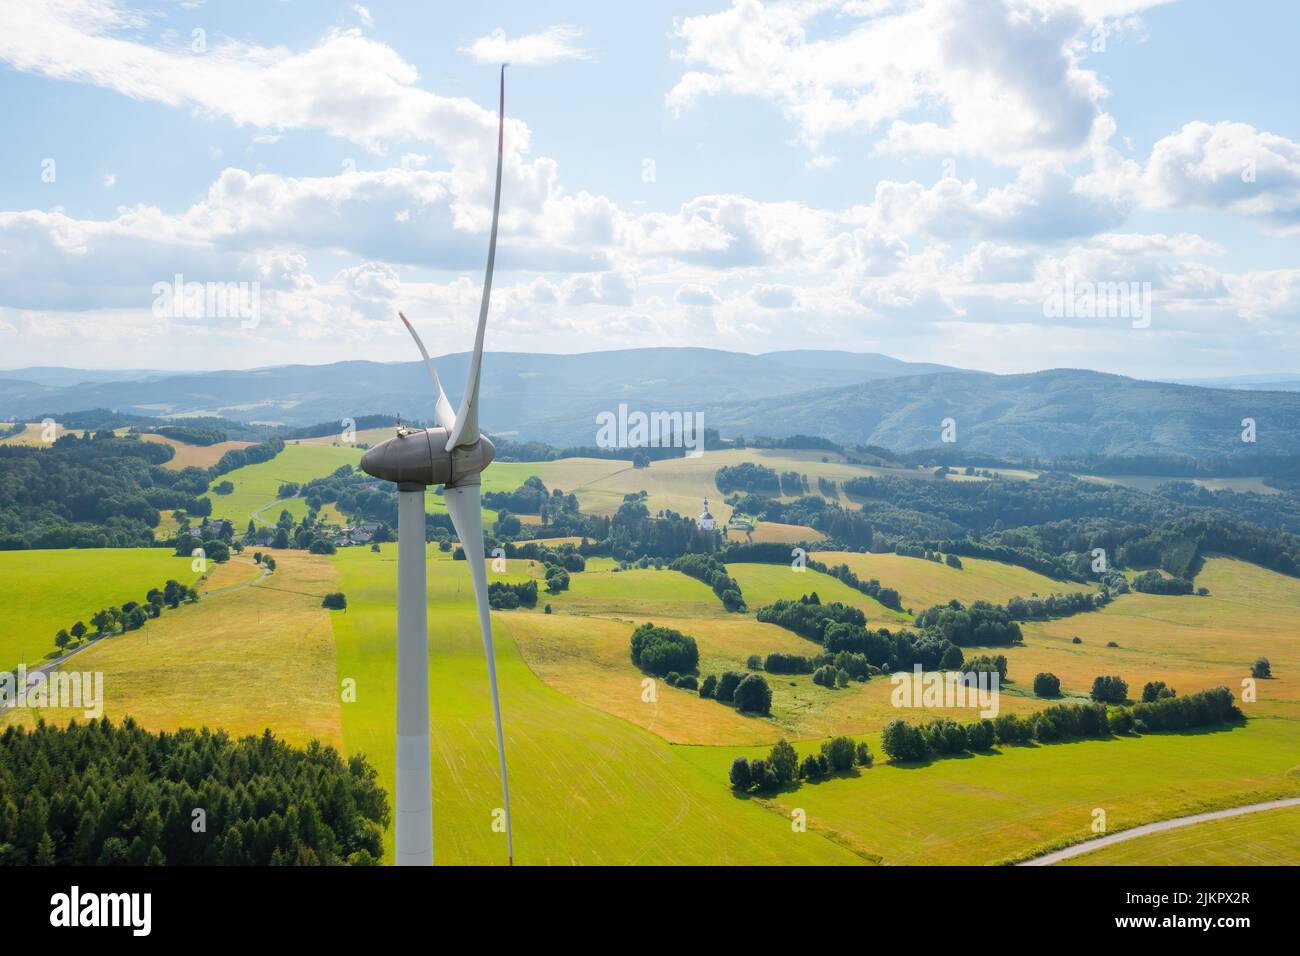 Aerial view of wind turbines propeller in the yellow field with amazing view on the mountains in sunny day. Environment friendly and renewable energy resource.  Stock Photo